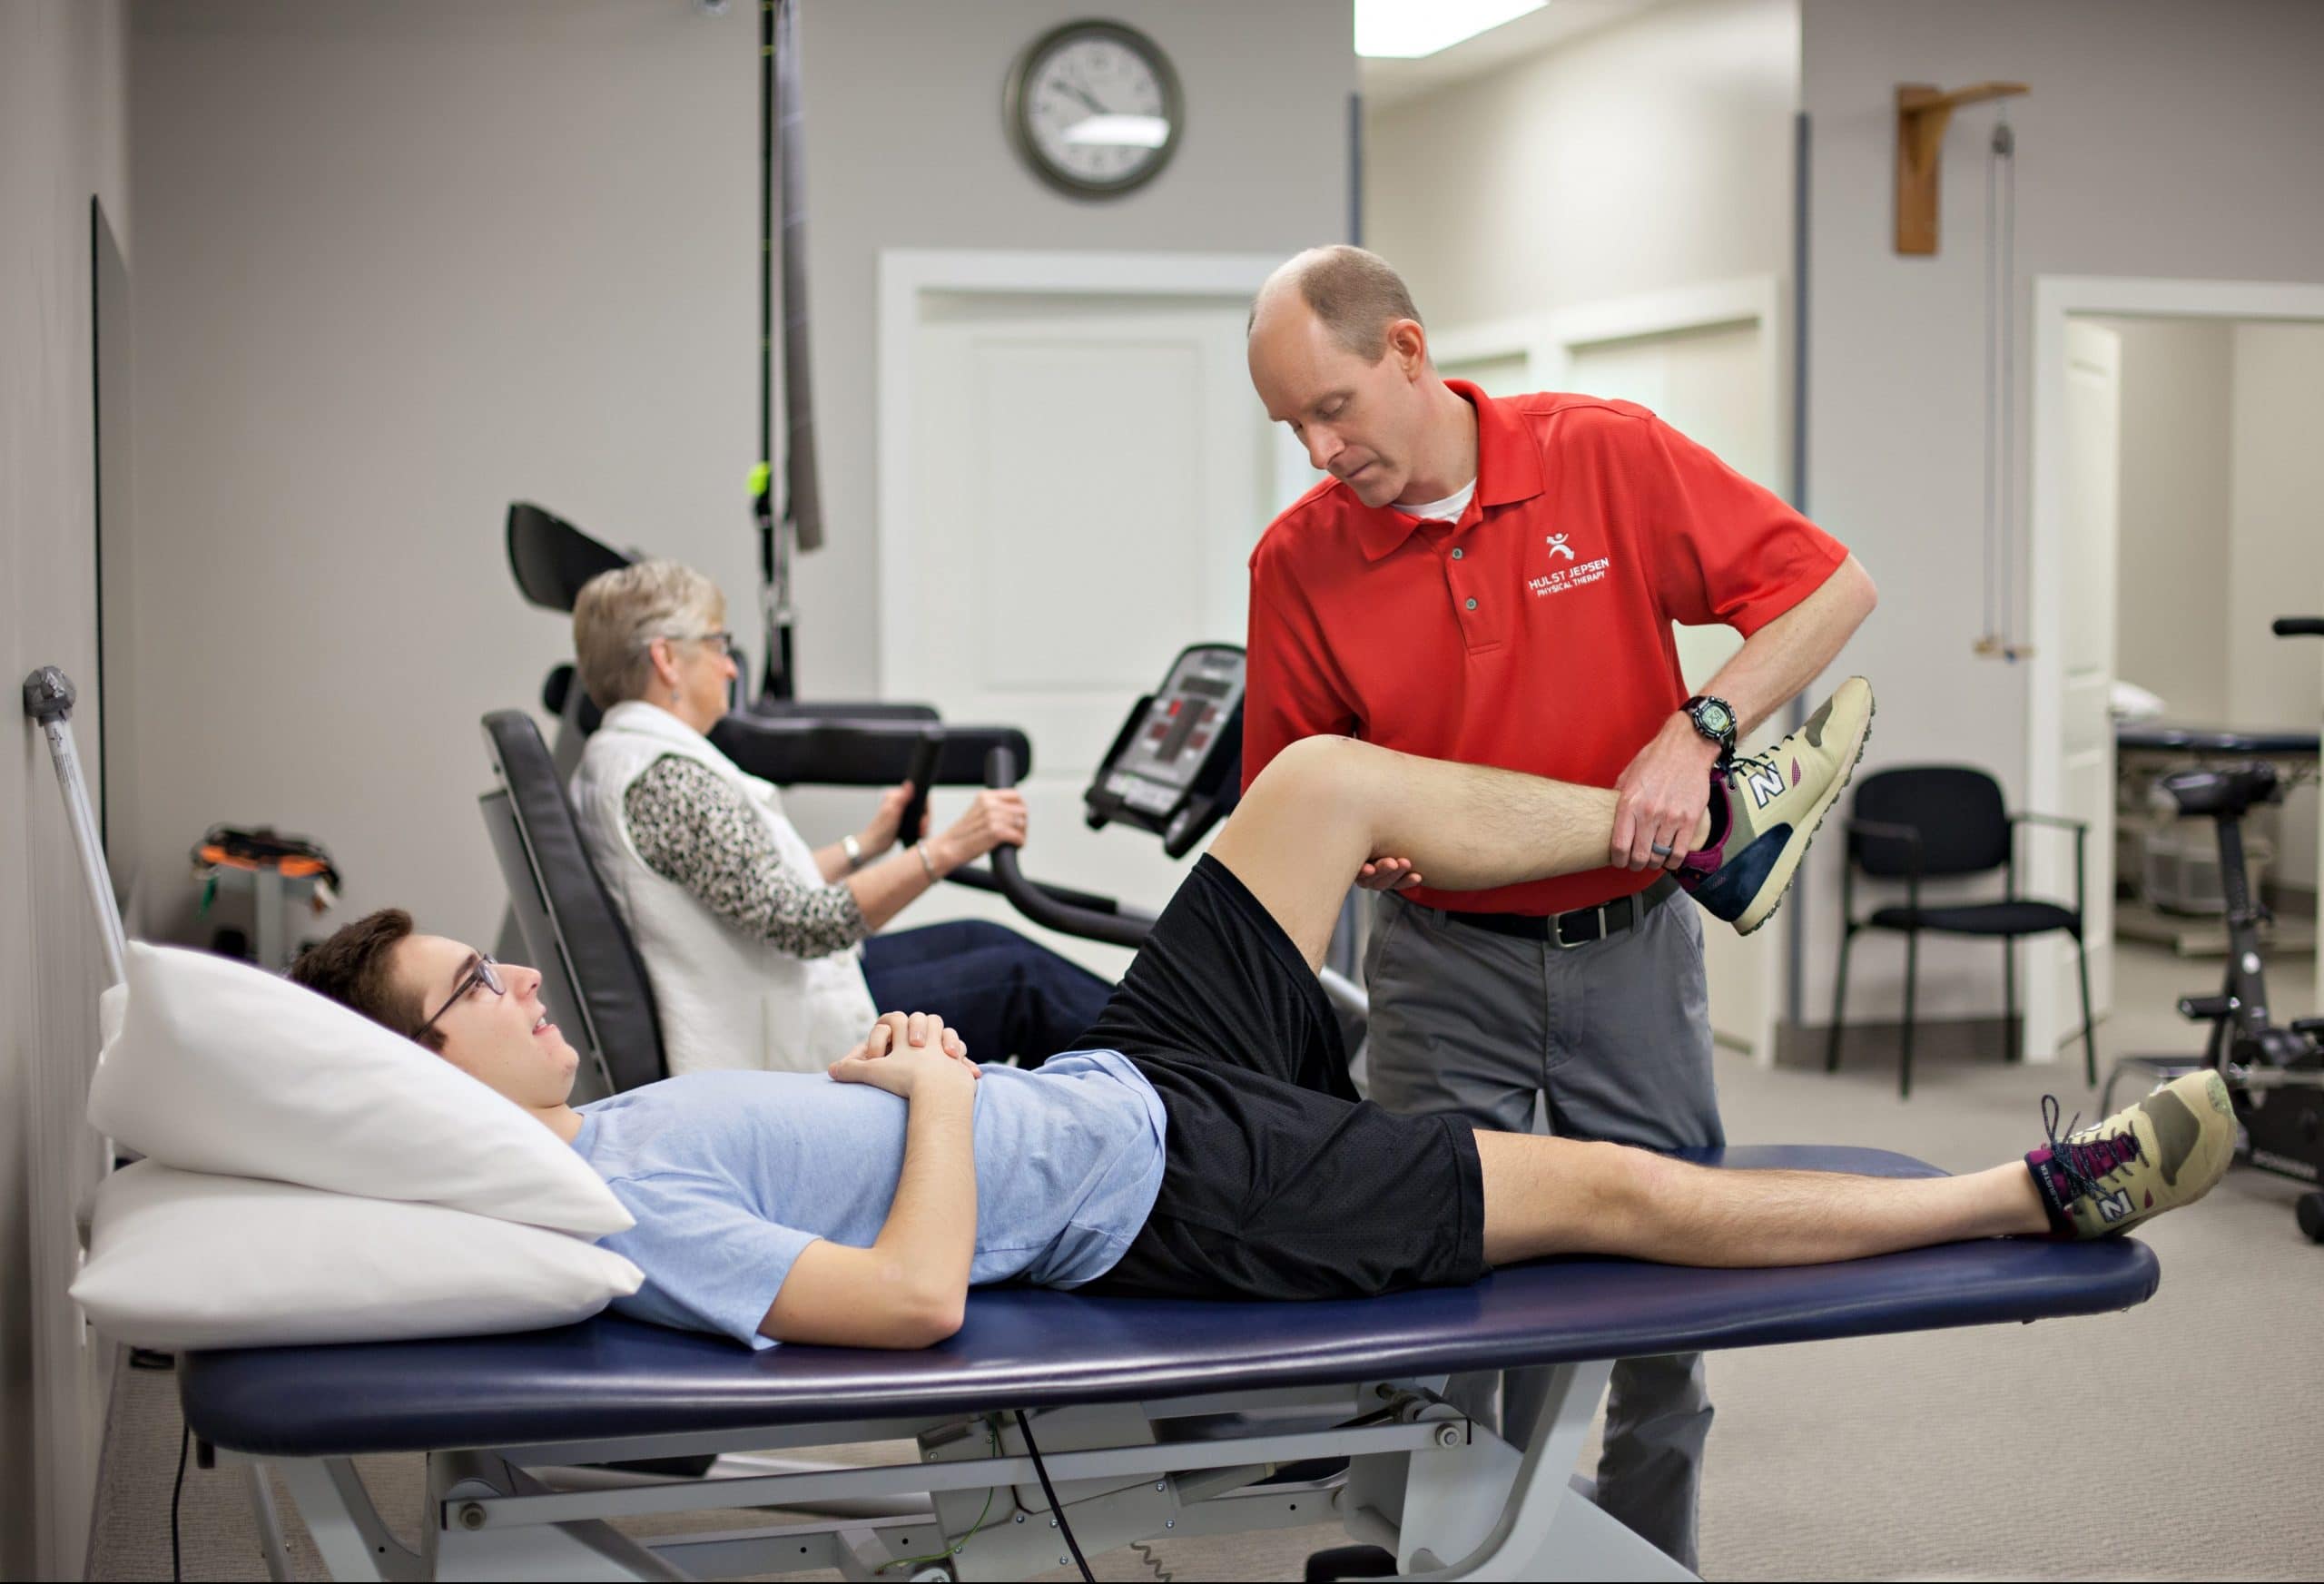 Orthopedic Physical Therapy: What Is It, How Does It Help?